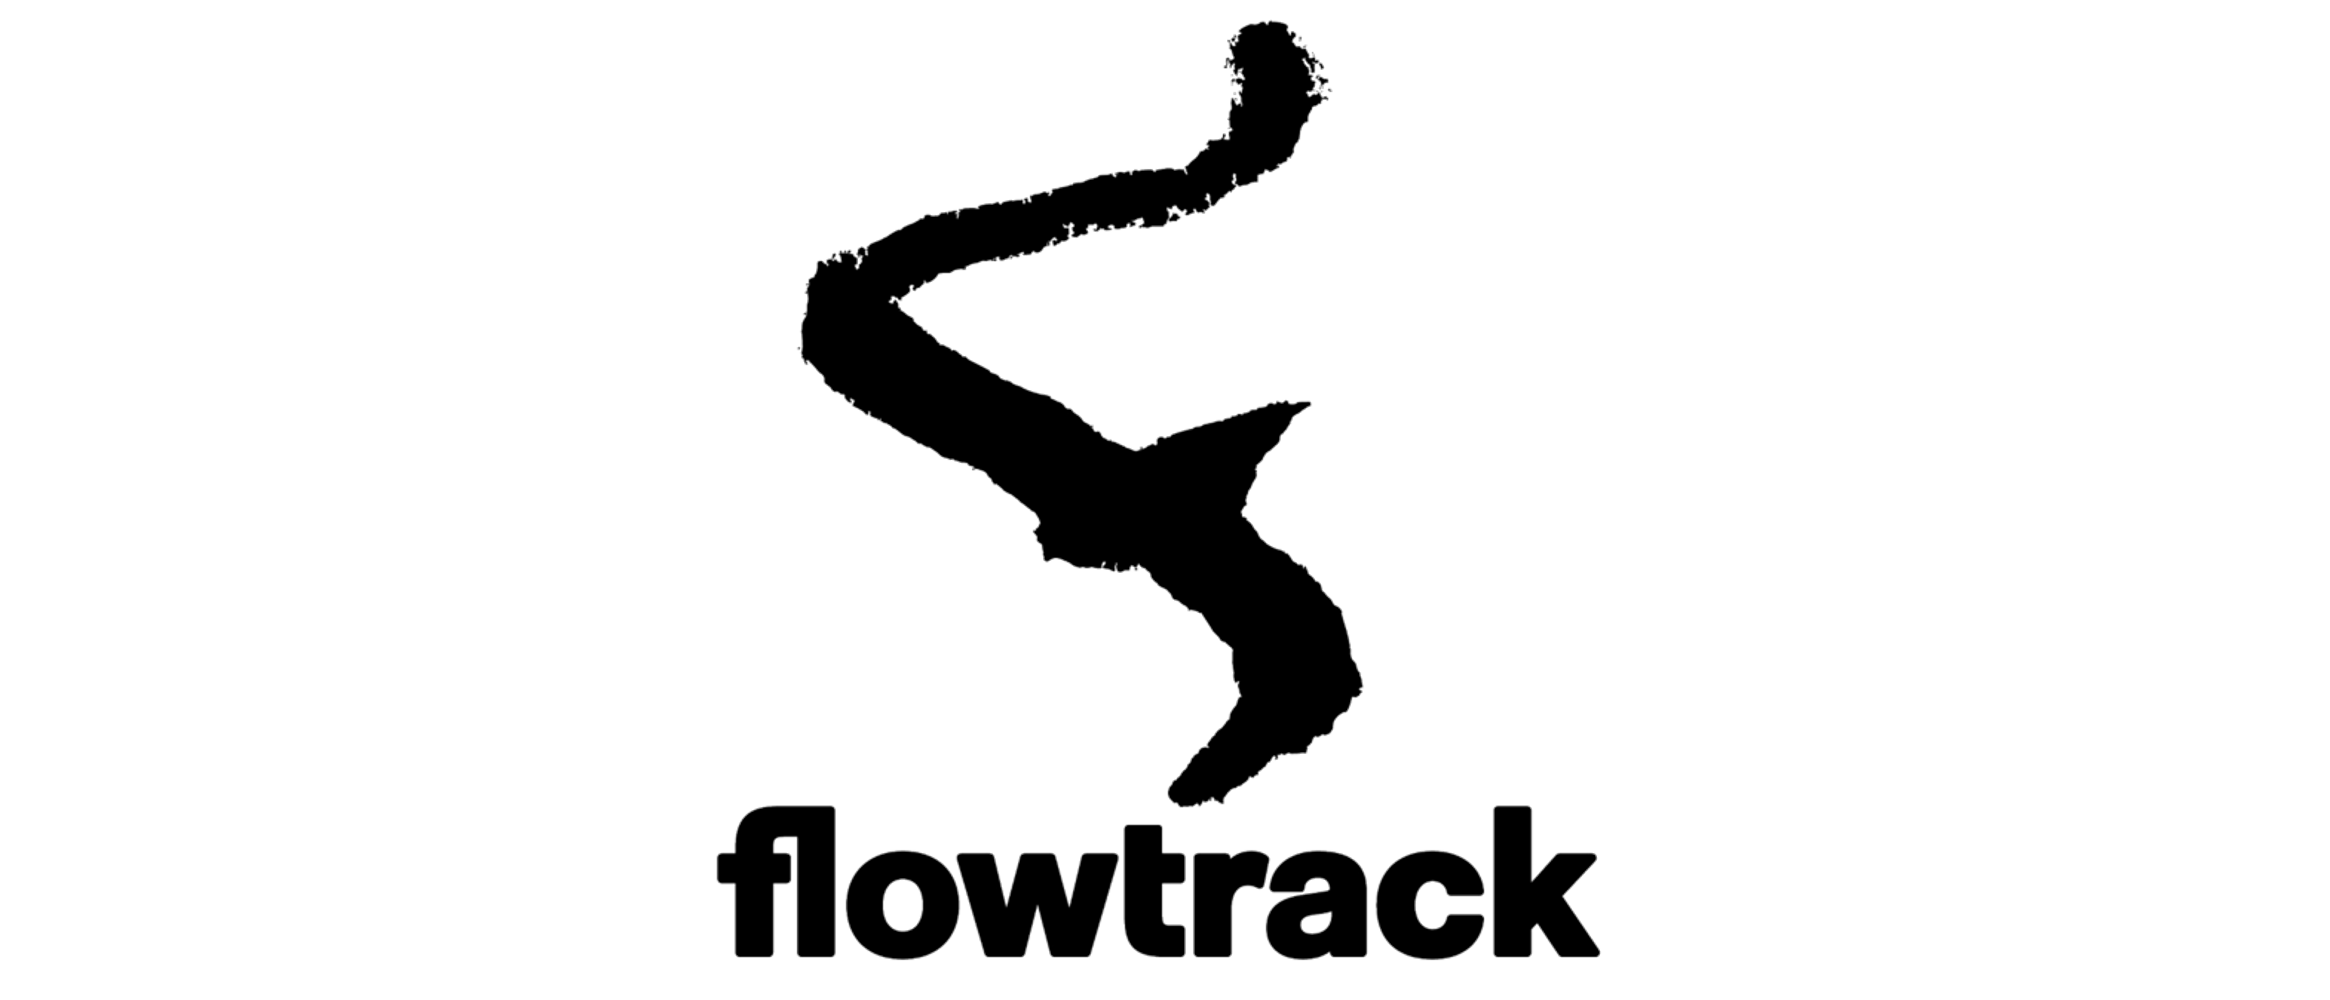 Flowtrack.be